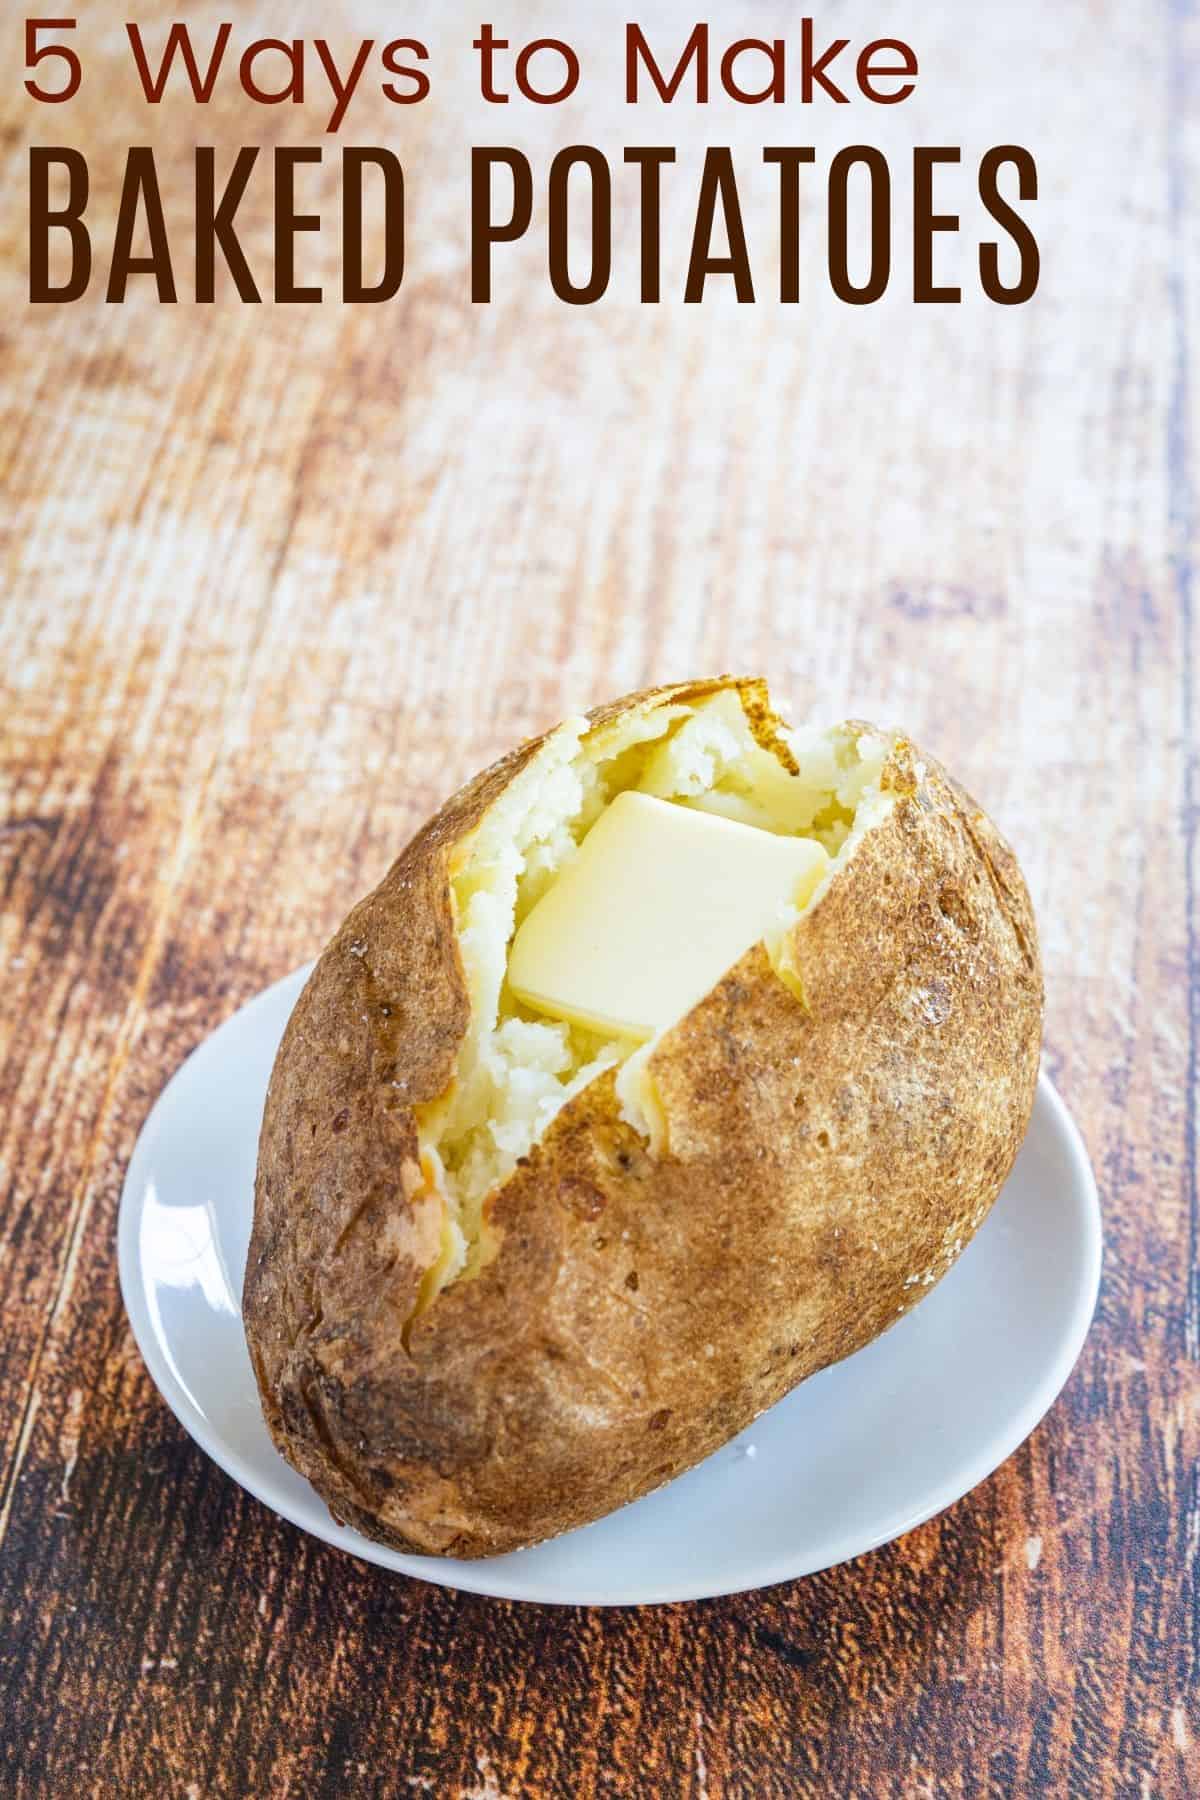 baked potato on a plate cut open with a pat of butter inside